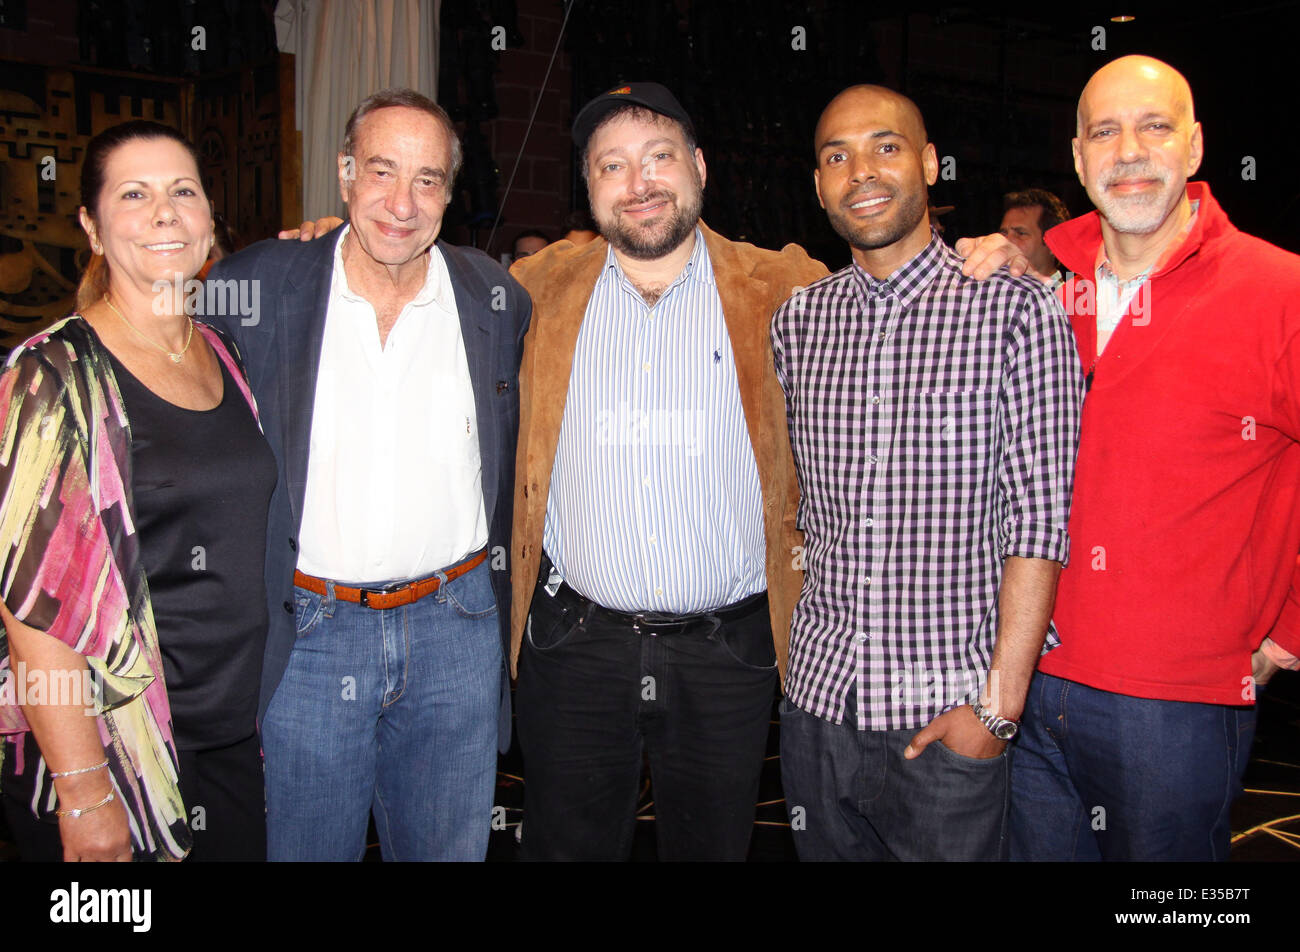 Meet and greet with the cast of the Broadway musical “Soul Doctor” held at Playwrights Horizons rehearsal space.  Featuring: David Schechter,Daniel S. Wise,Benoit-Swan Pouffer,Guests Where: New York, NY, United States When: 27 Jun 2013 Stock Photo